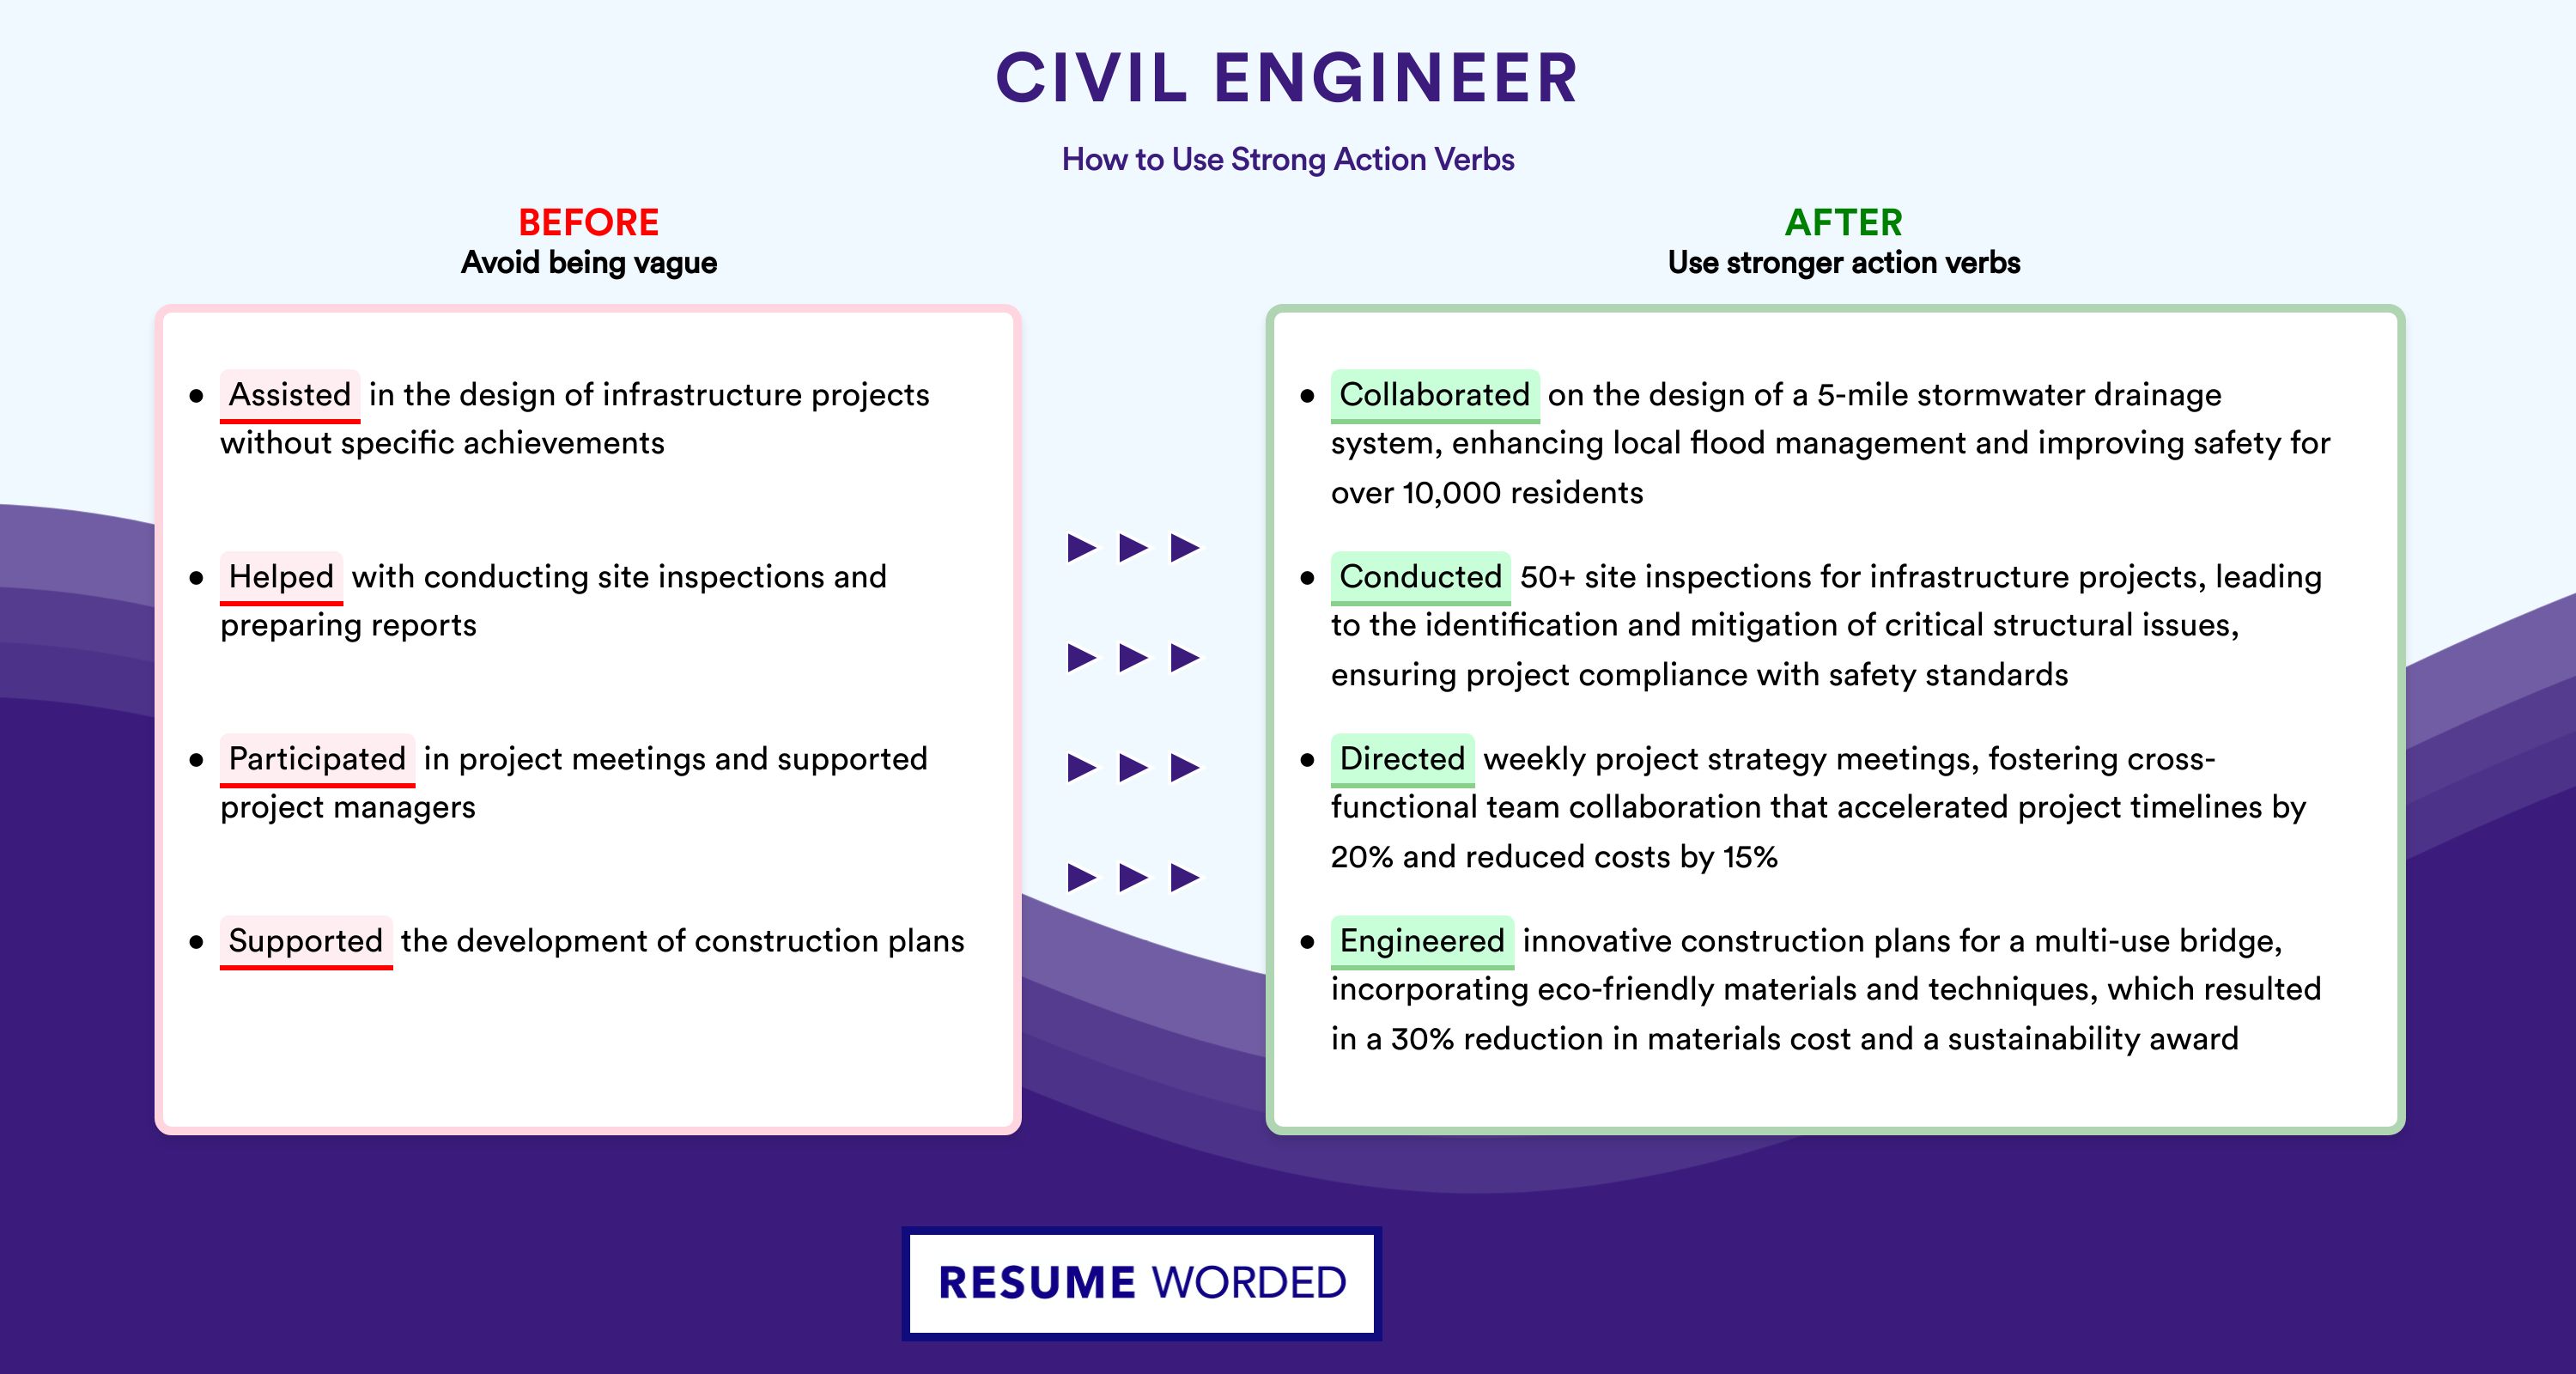 Action Verbs for Civil Engineer